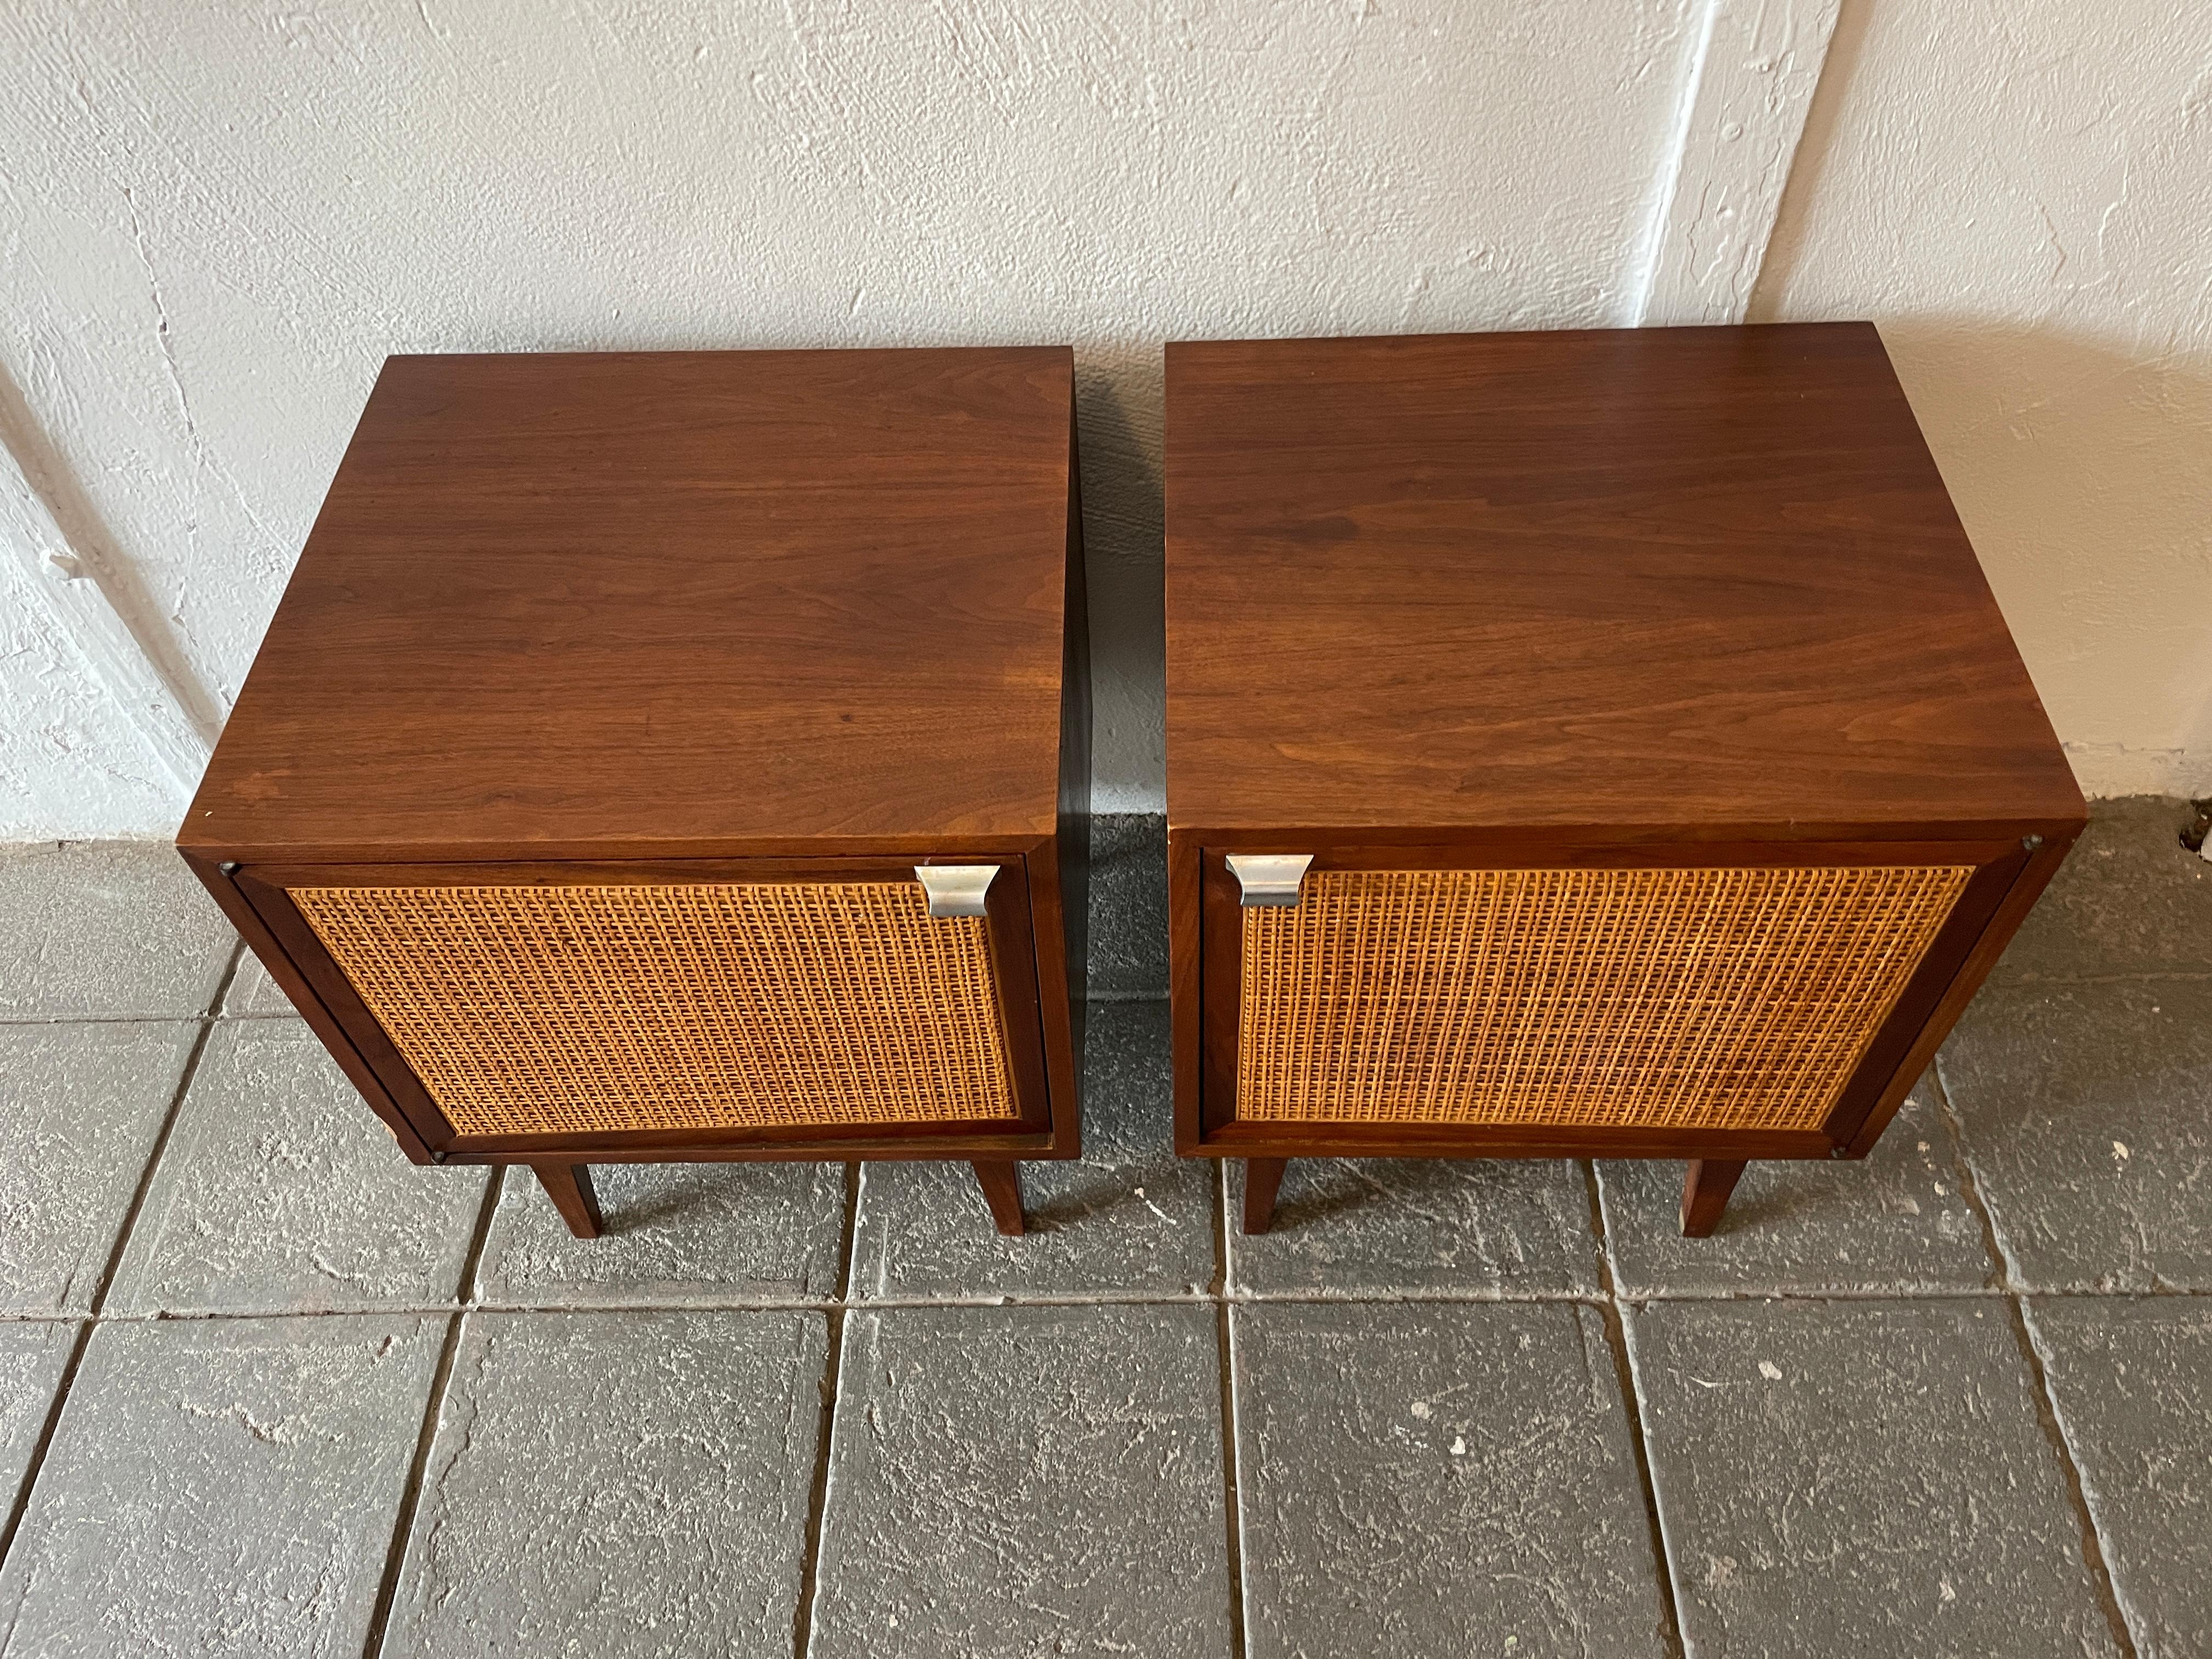 Pair of Mid-Century Modern walnut with cane door nightstands. Beautiful design and perfect size. Nice walnut grain with aluminum handle. Cane door fronts are perfect. Each nightstand has 1 adjustable shelf inside. Sits on solid walnut base with